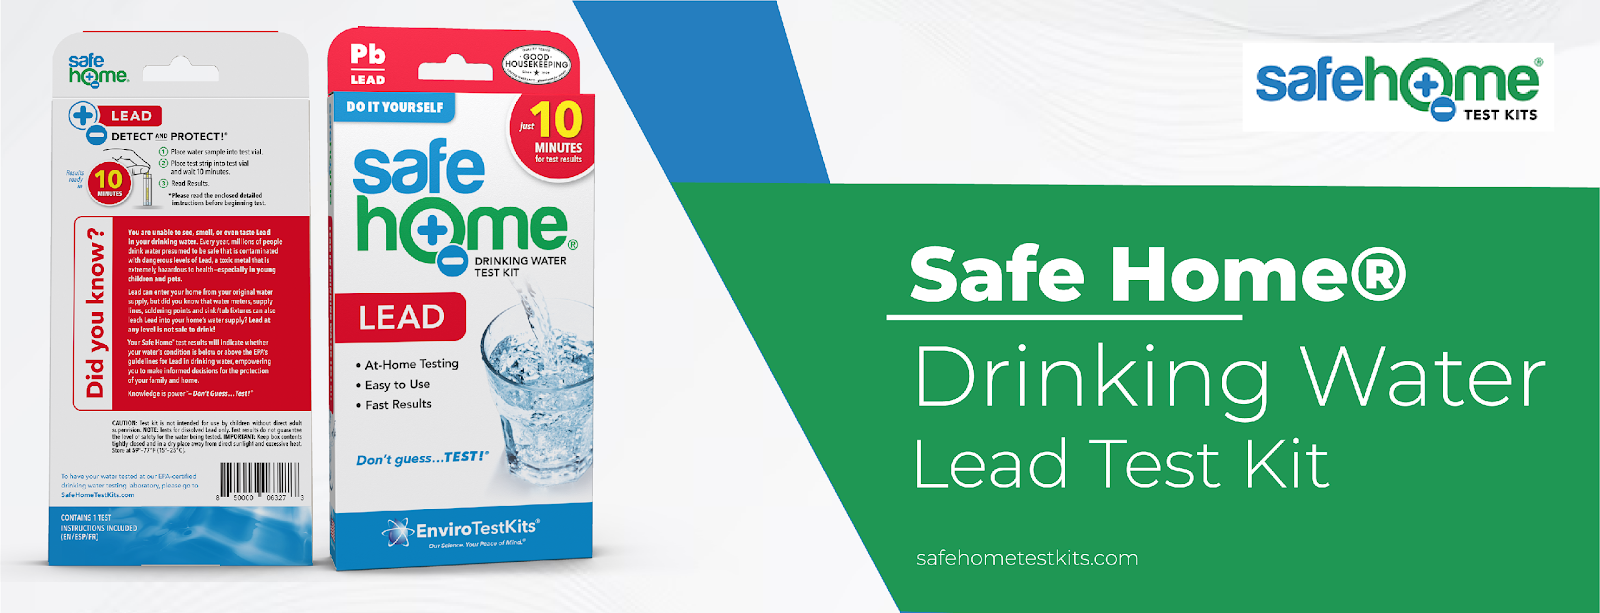 Safe Home® Drinking Water Lead Test Kit